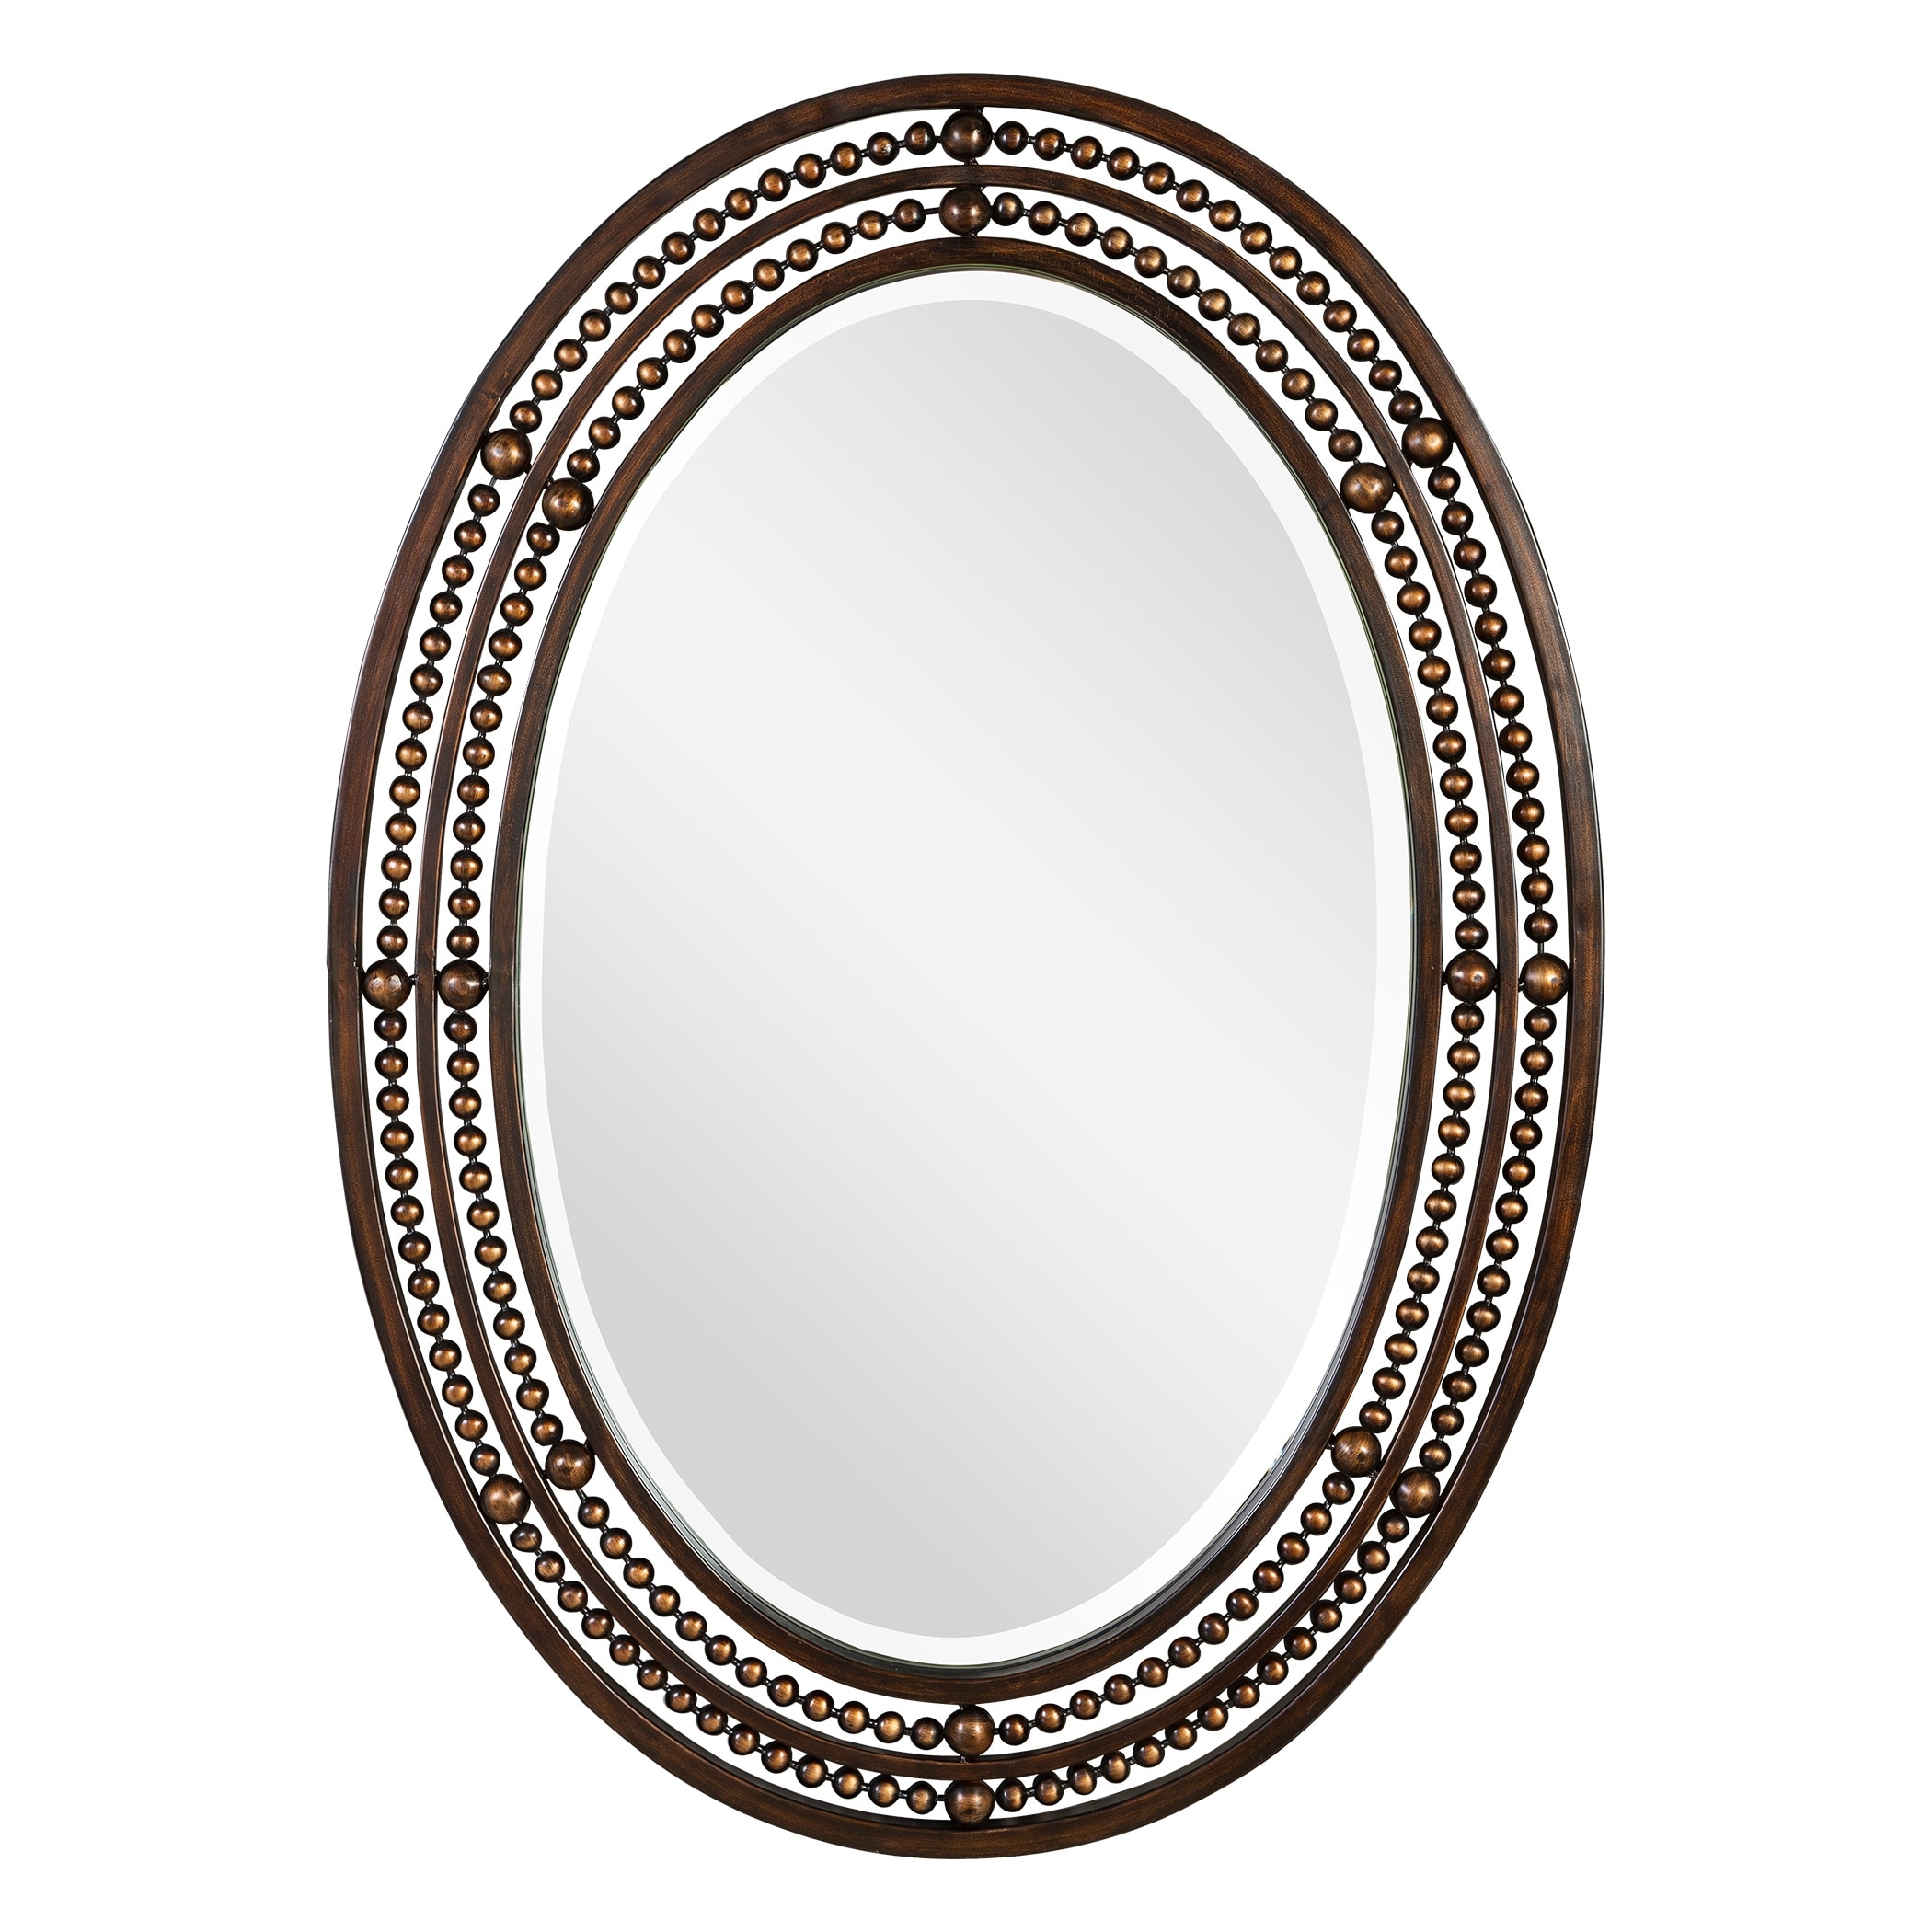 Oil Rubbed Bronze Oval Beveled Mirror Bed Bath  Beyond 32208944